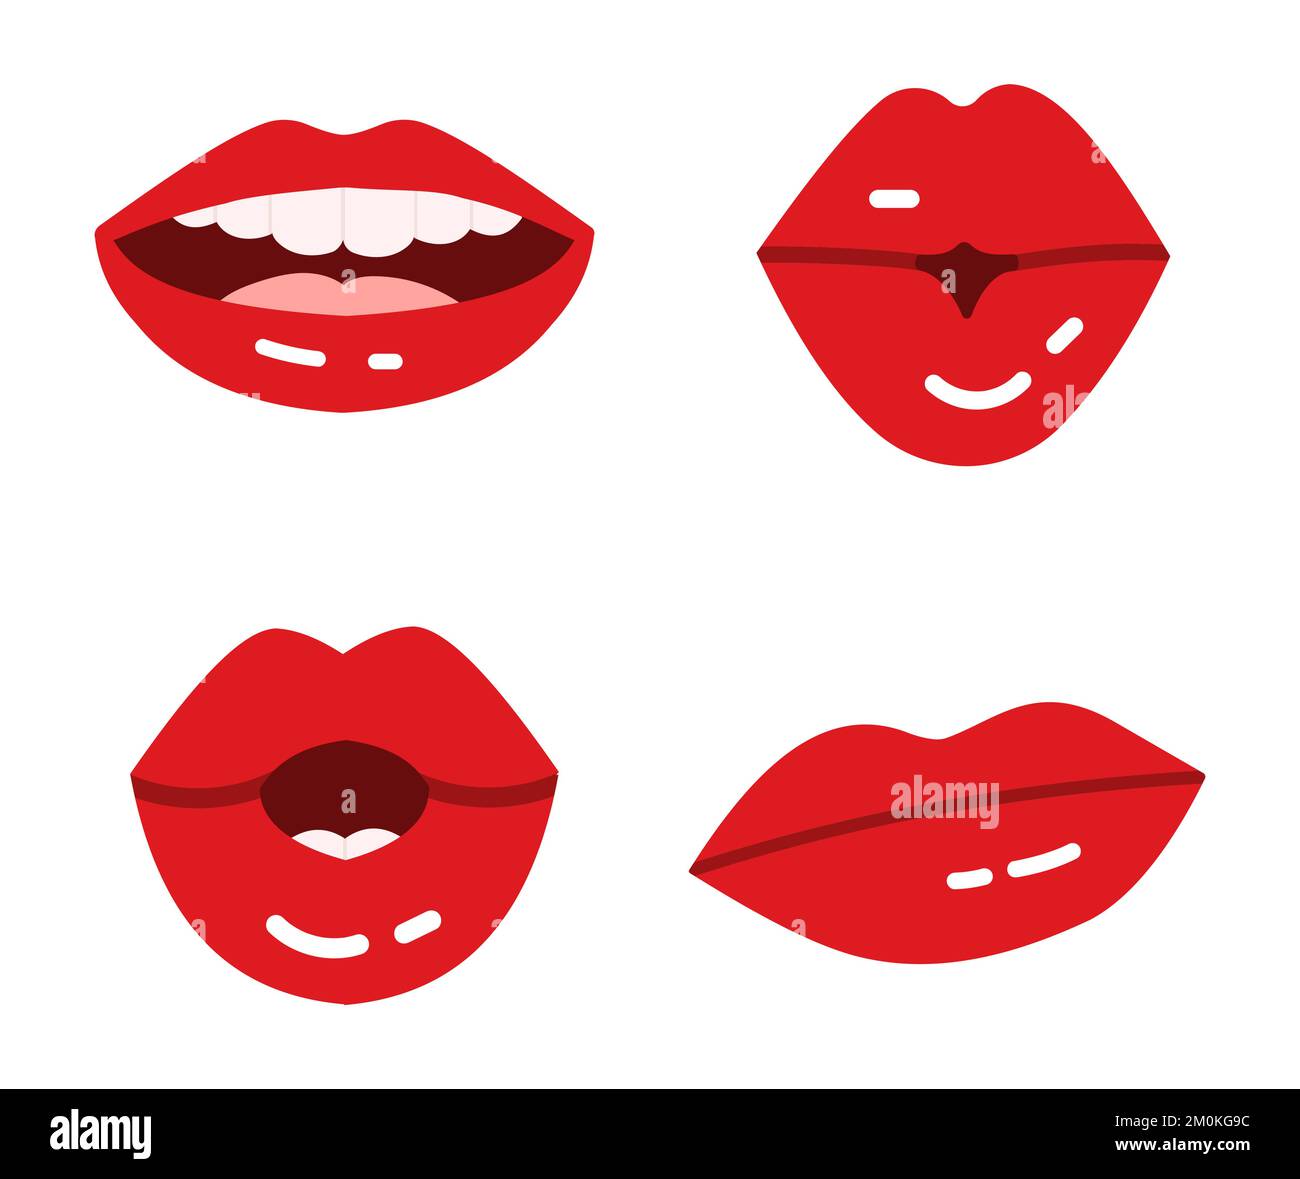 Cartoon lips. Glossy red seductive lipstick for ladies. Kissing, smiling with teeth, surprised and hesitating expressions Stock Vector